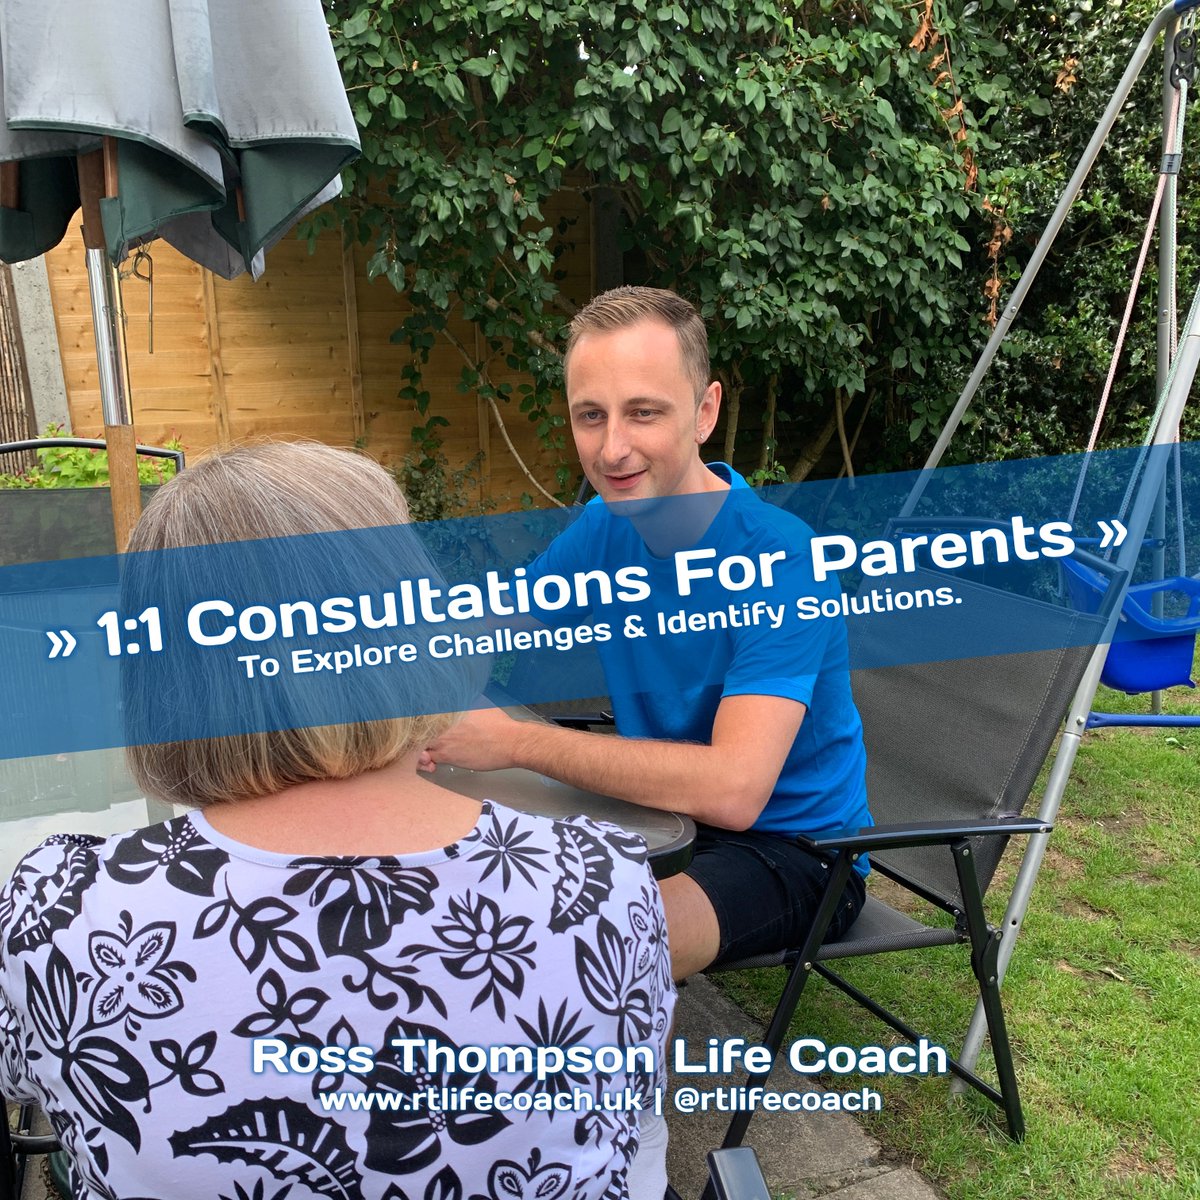 🏆 Consultations For Parents

💬 Explore challenges, gain advice and identify solutions as we delve into your child's unique circumstances. Get in touch to book your consultation today.

🌏 rtlifecoach.uk

#parentingsupport #parentconsultations #everychildmatters